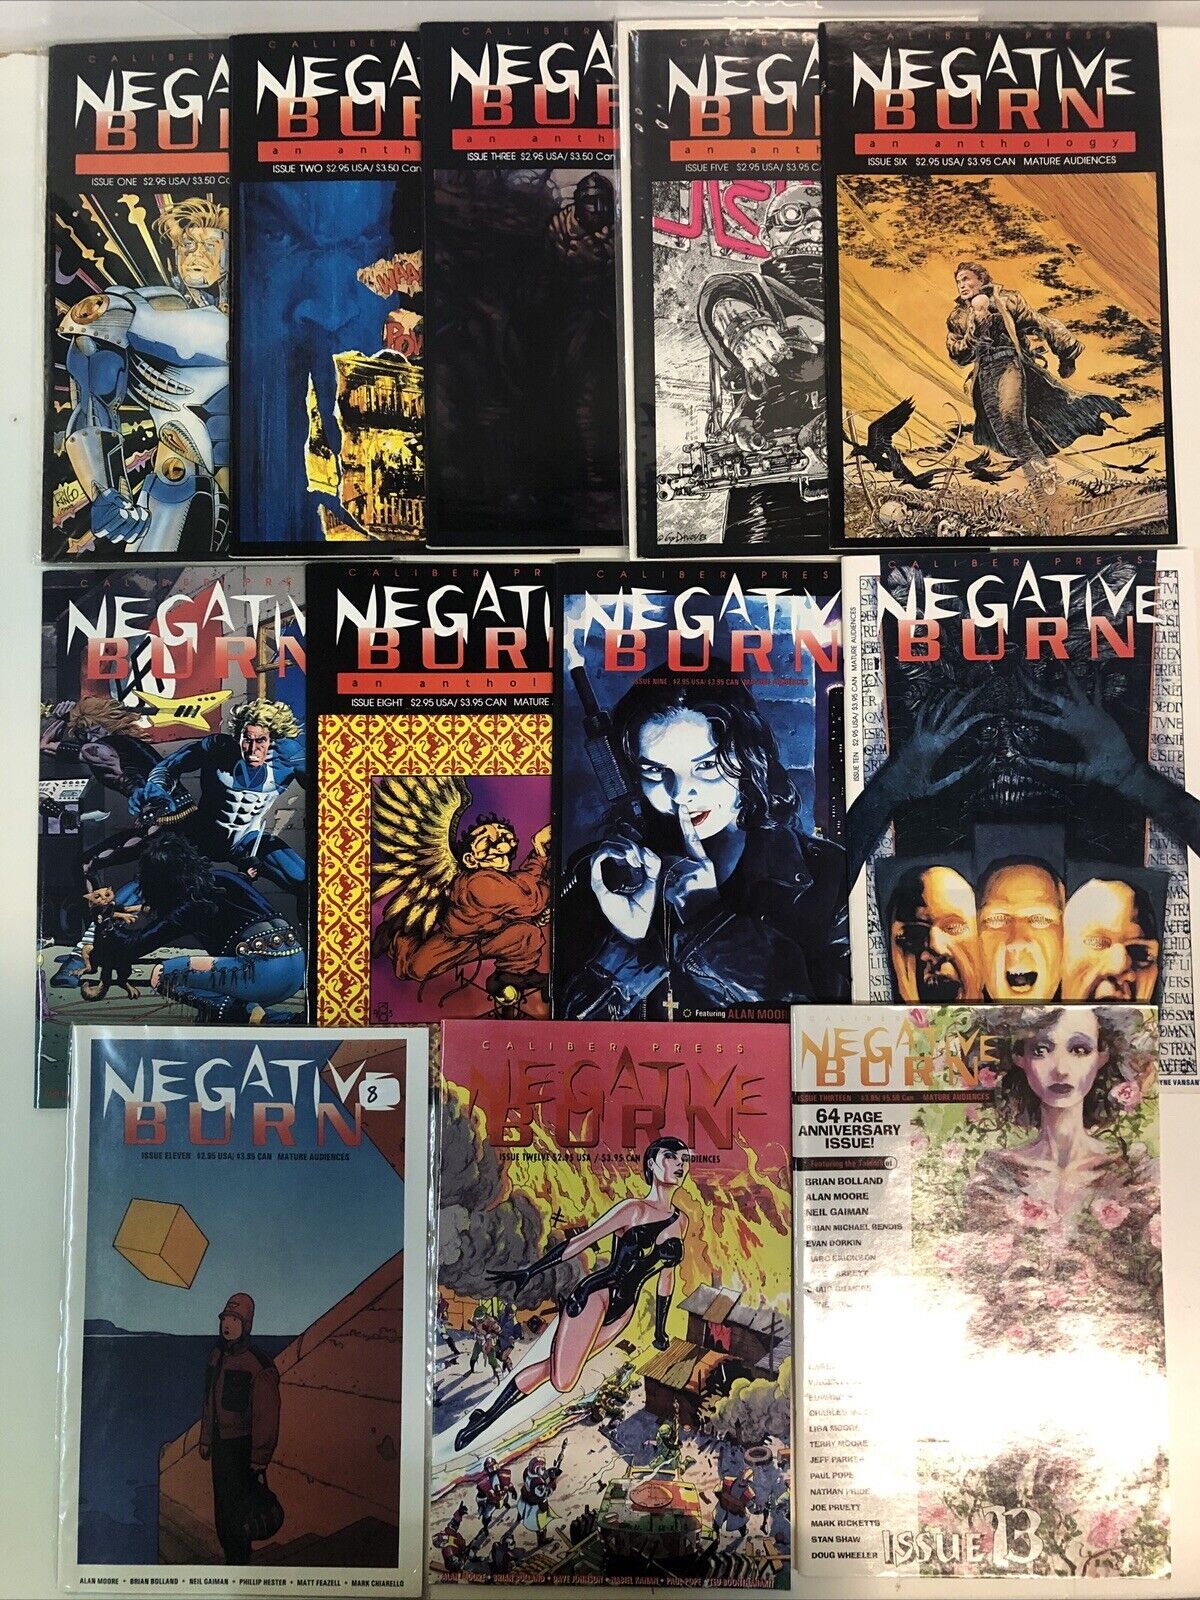 Negative Burn: An Anthology (1993) Consequential Set # 1-13 (VF/NM) Caliber